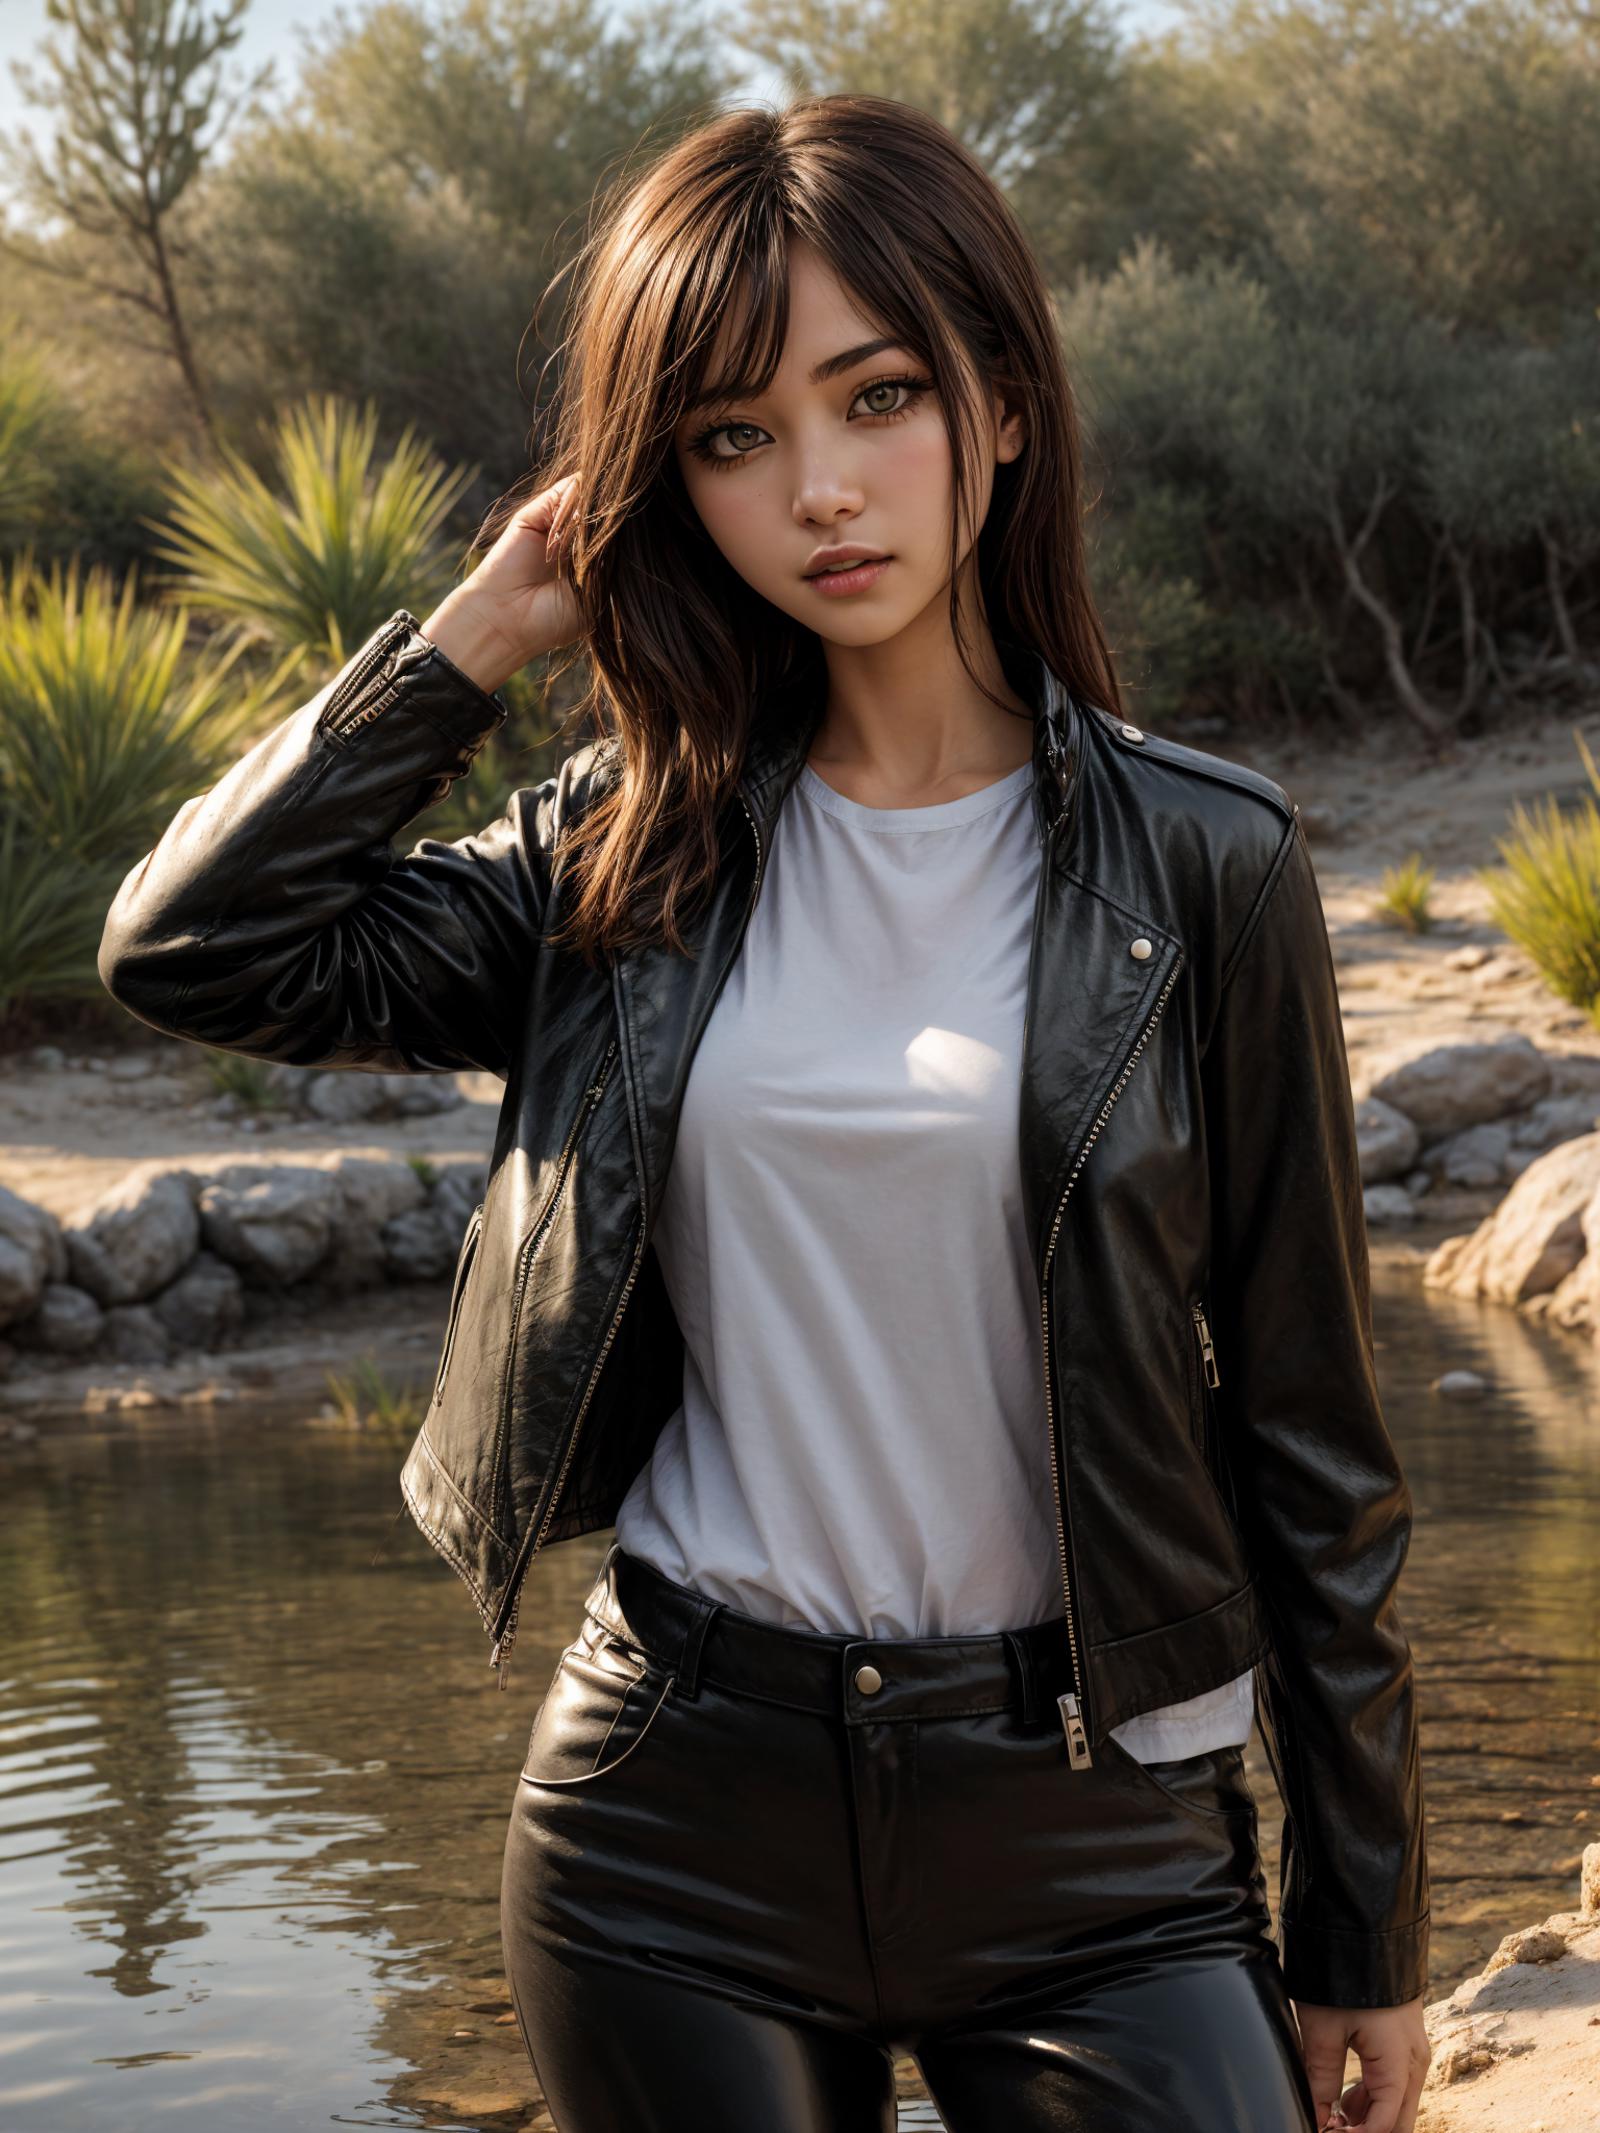 A woman wearing a black leather jacket, white shirt, and black pants is standing near a body of water.